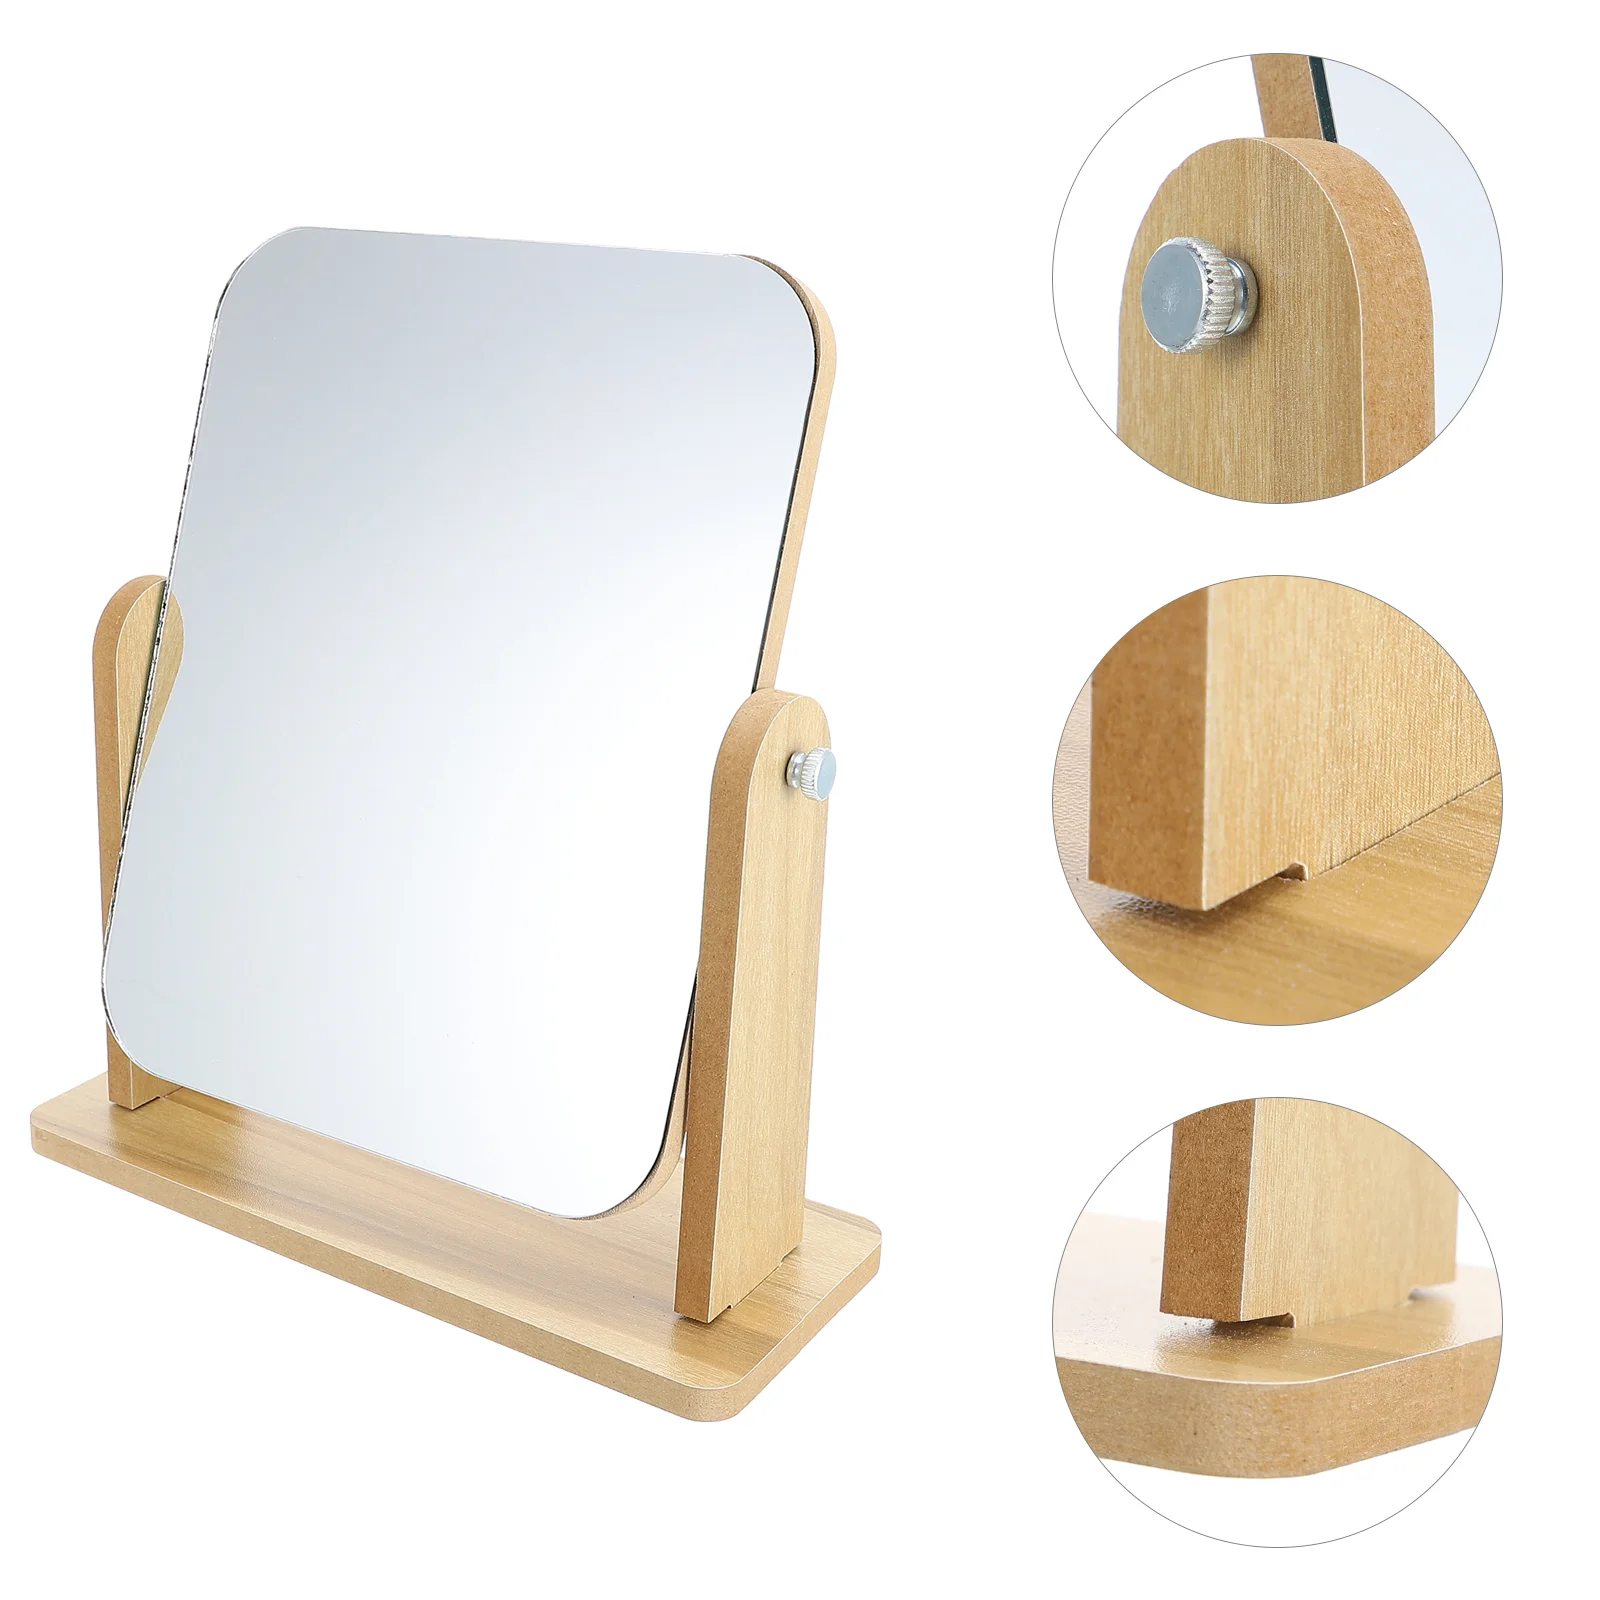 

Mirror Makeup Vanity Desk Table Swivel Double Magnifying Stand Sided Standing Portable Countertop Wood Handheld Beauty Personal